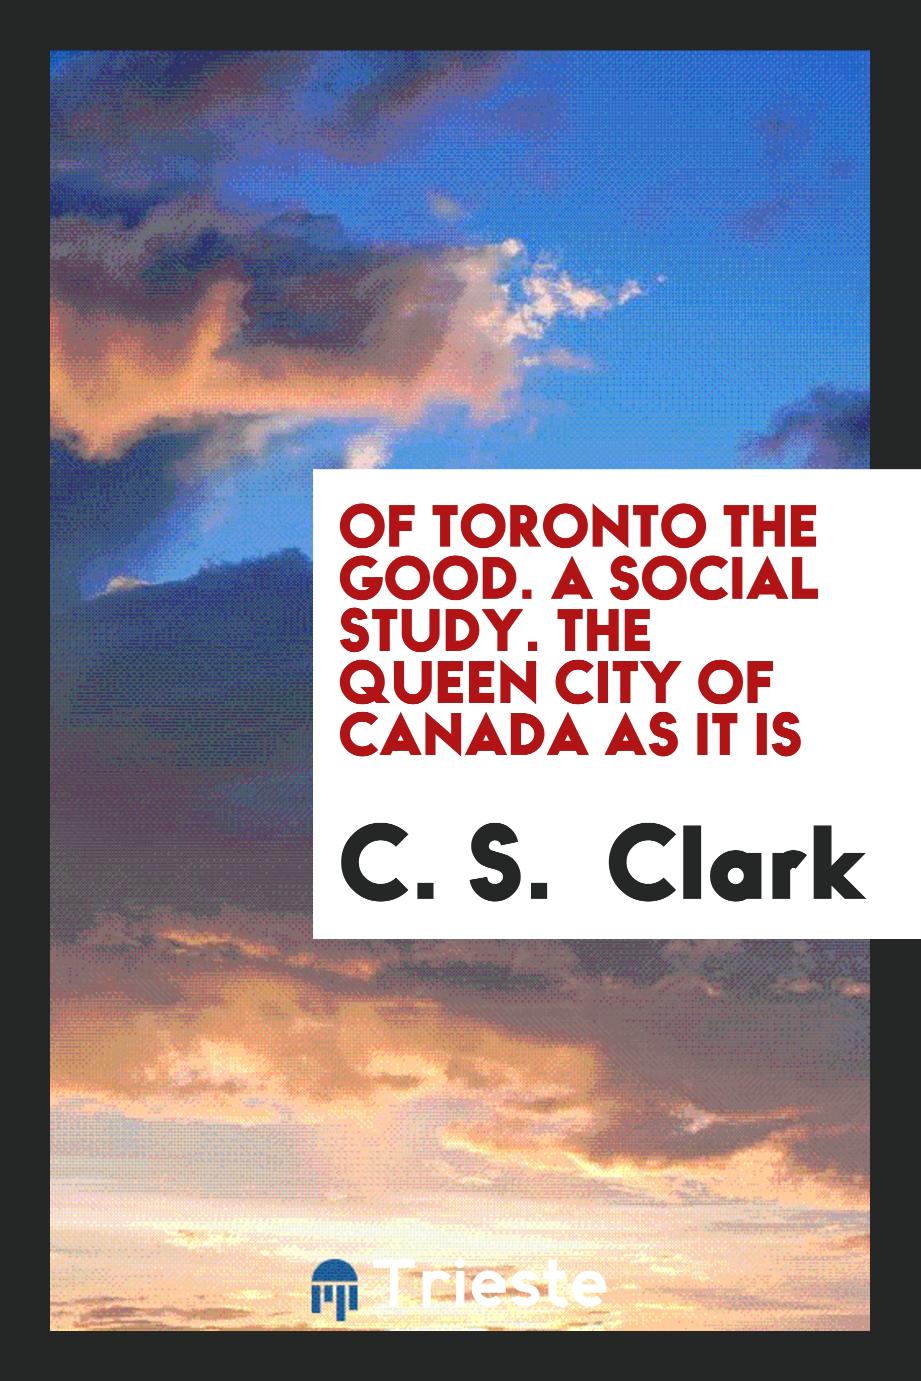 Of Toronto the good. A social study. The Queen City of Canada as it is